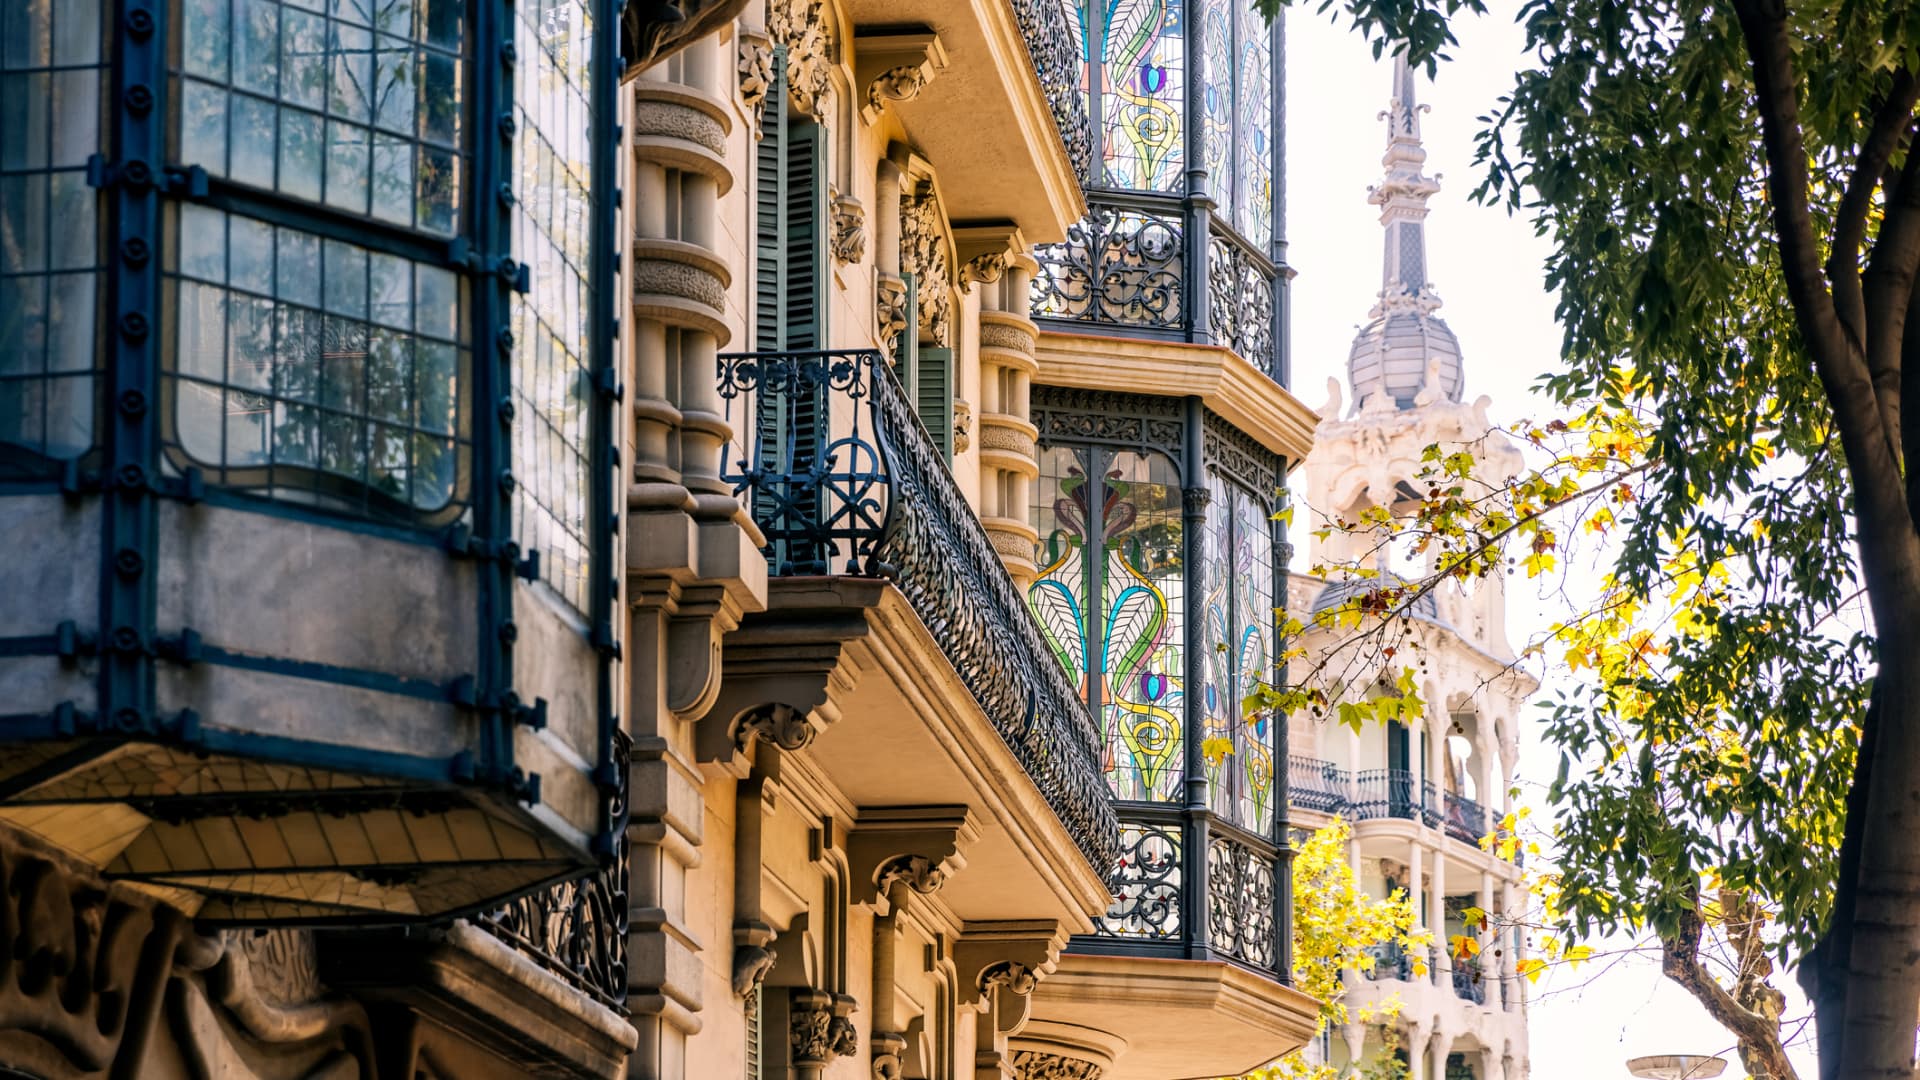 Residential buildings in Barcelona's Eixample district.